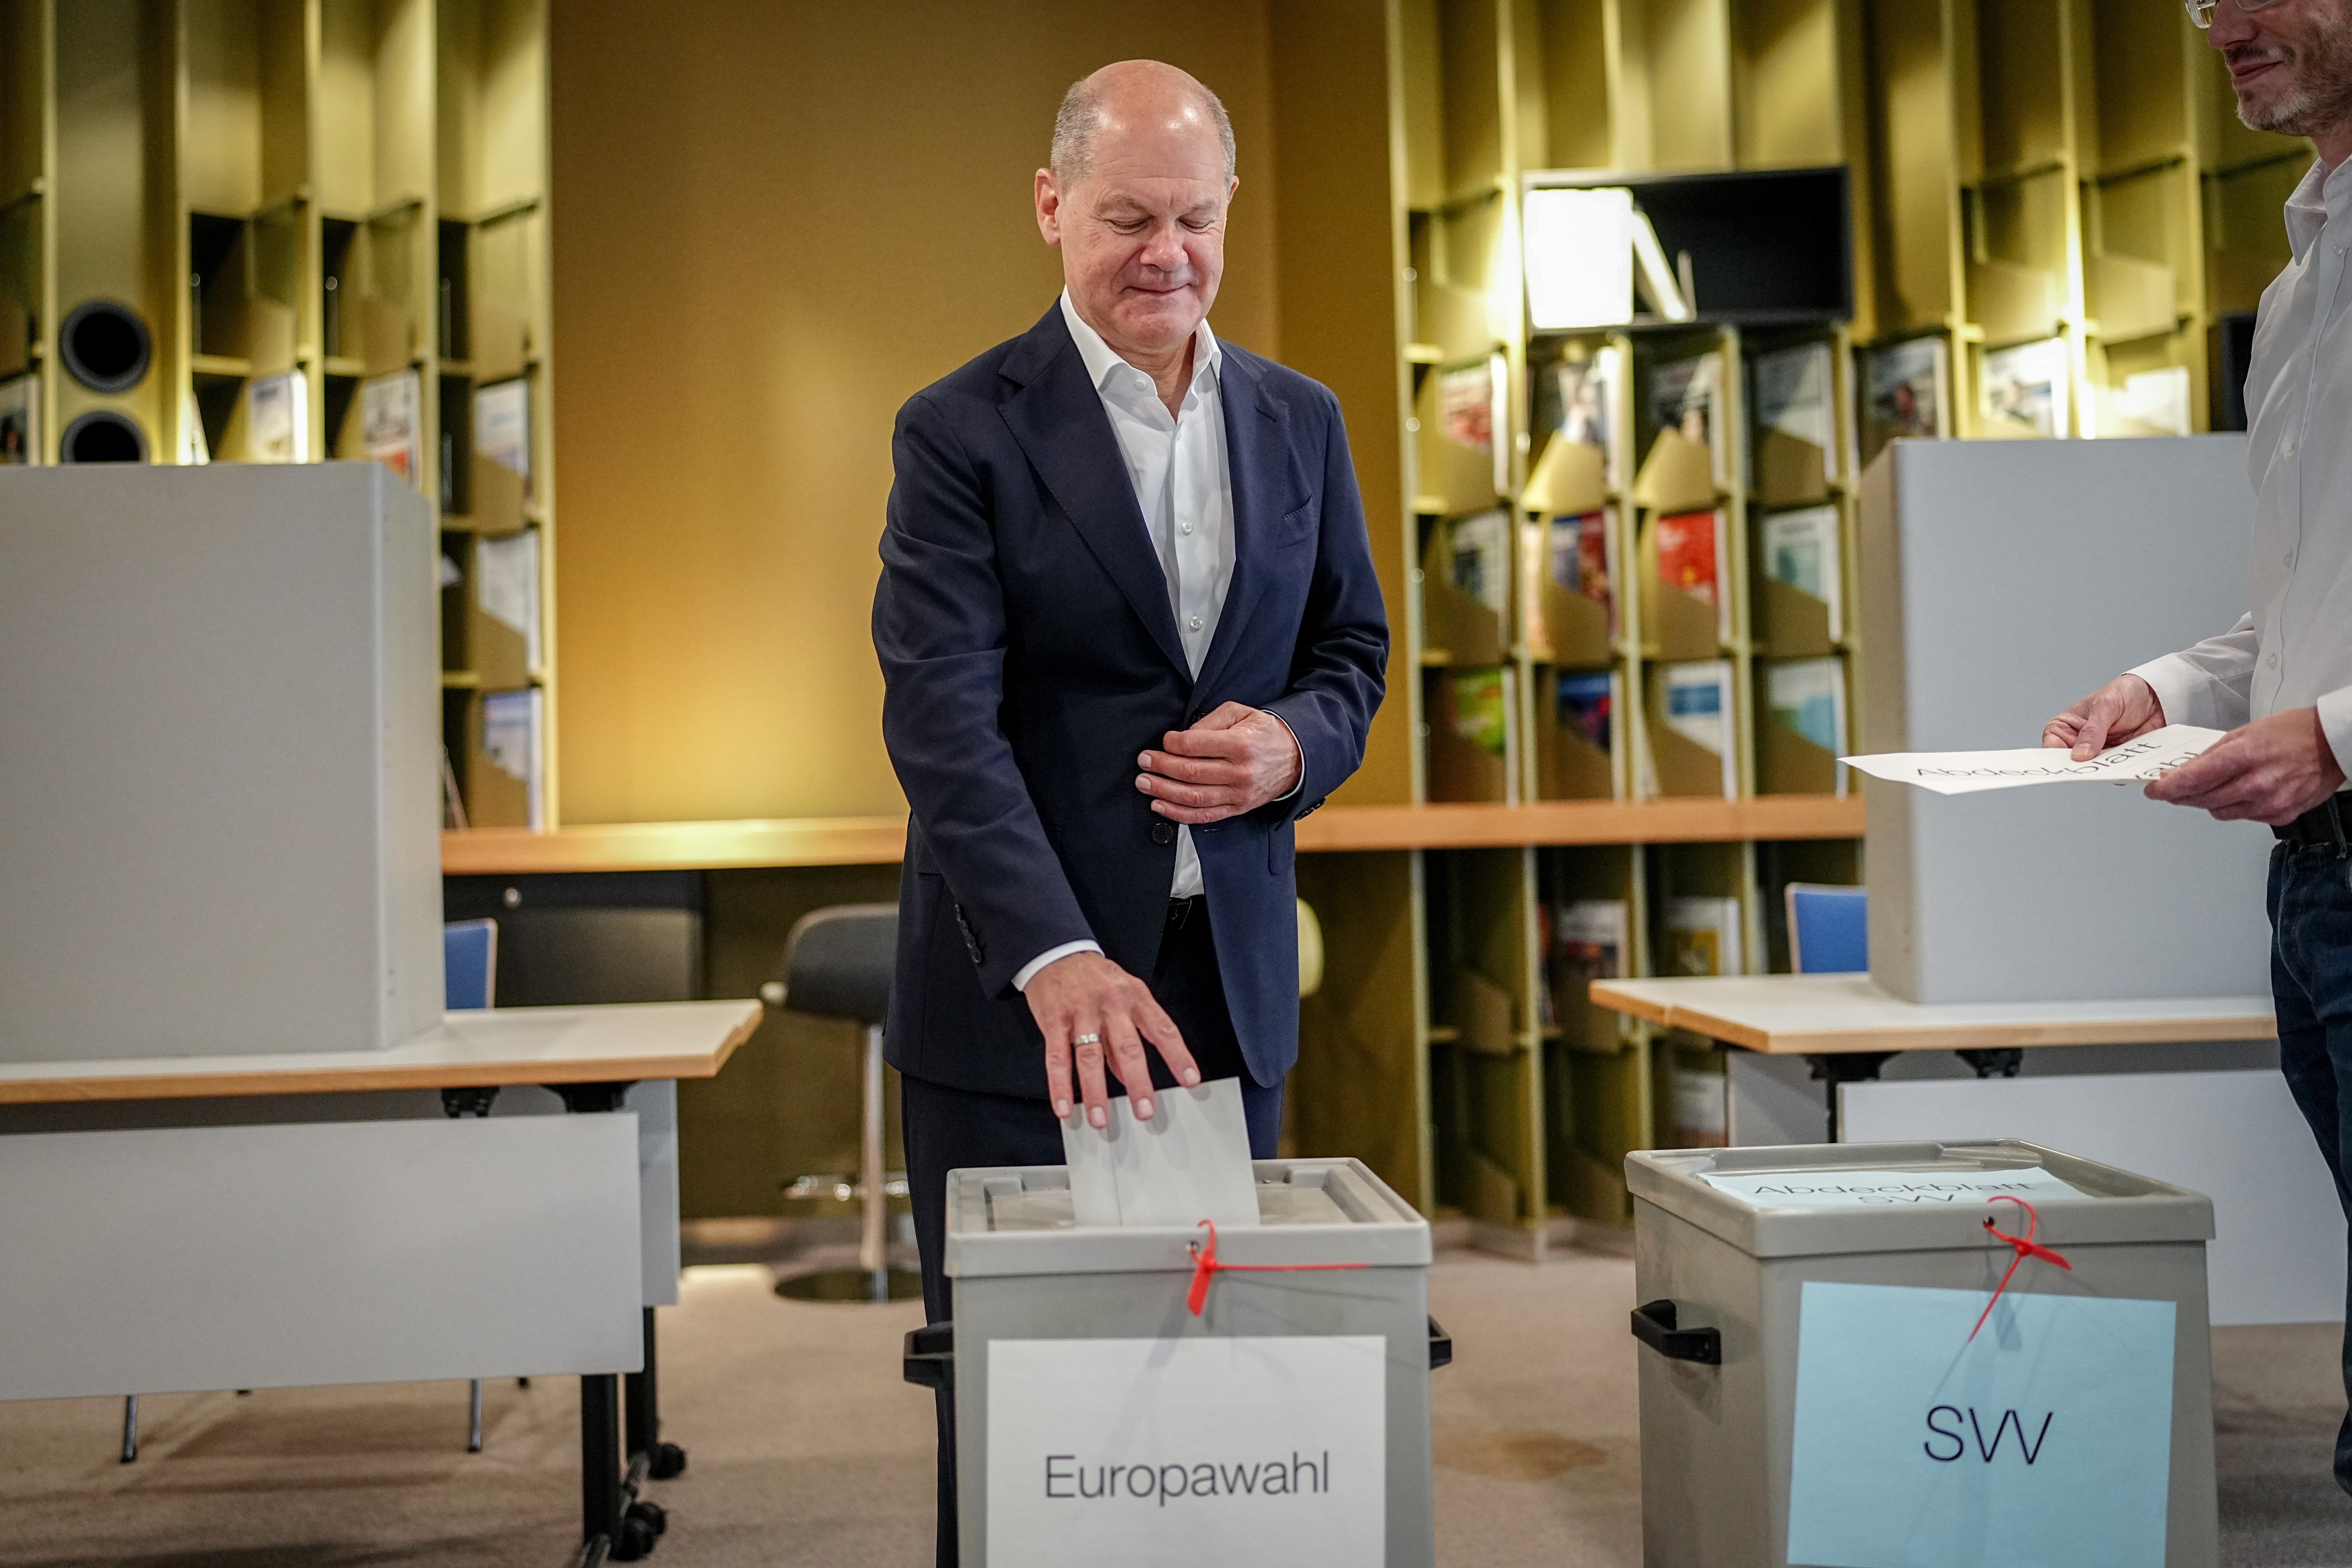 Olaf Scholz will not be calling his own snap election in Germany, a spokesperson for the chancellor said